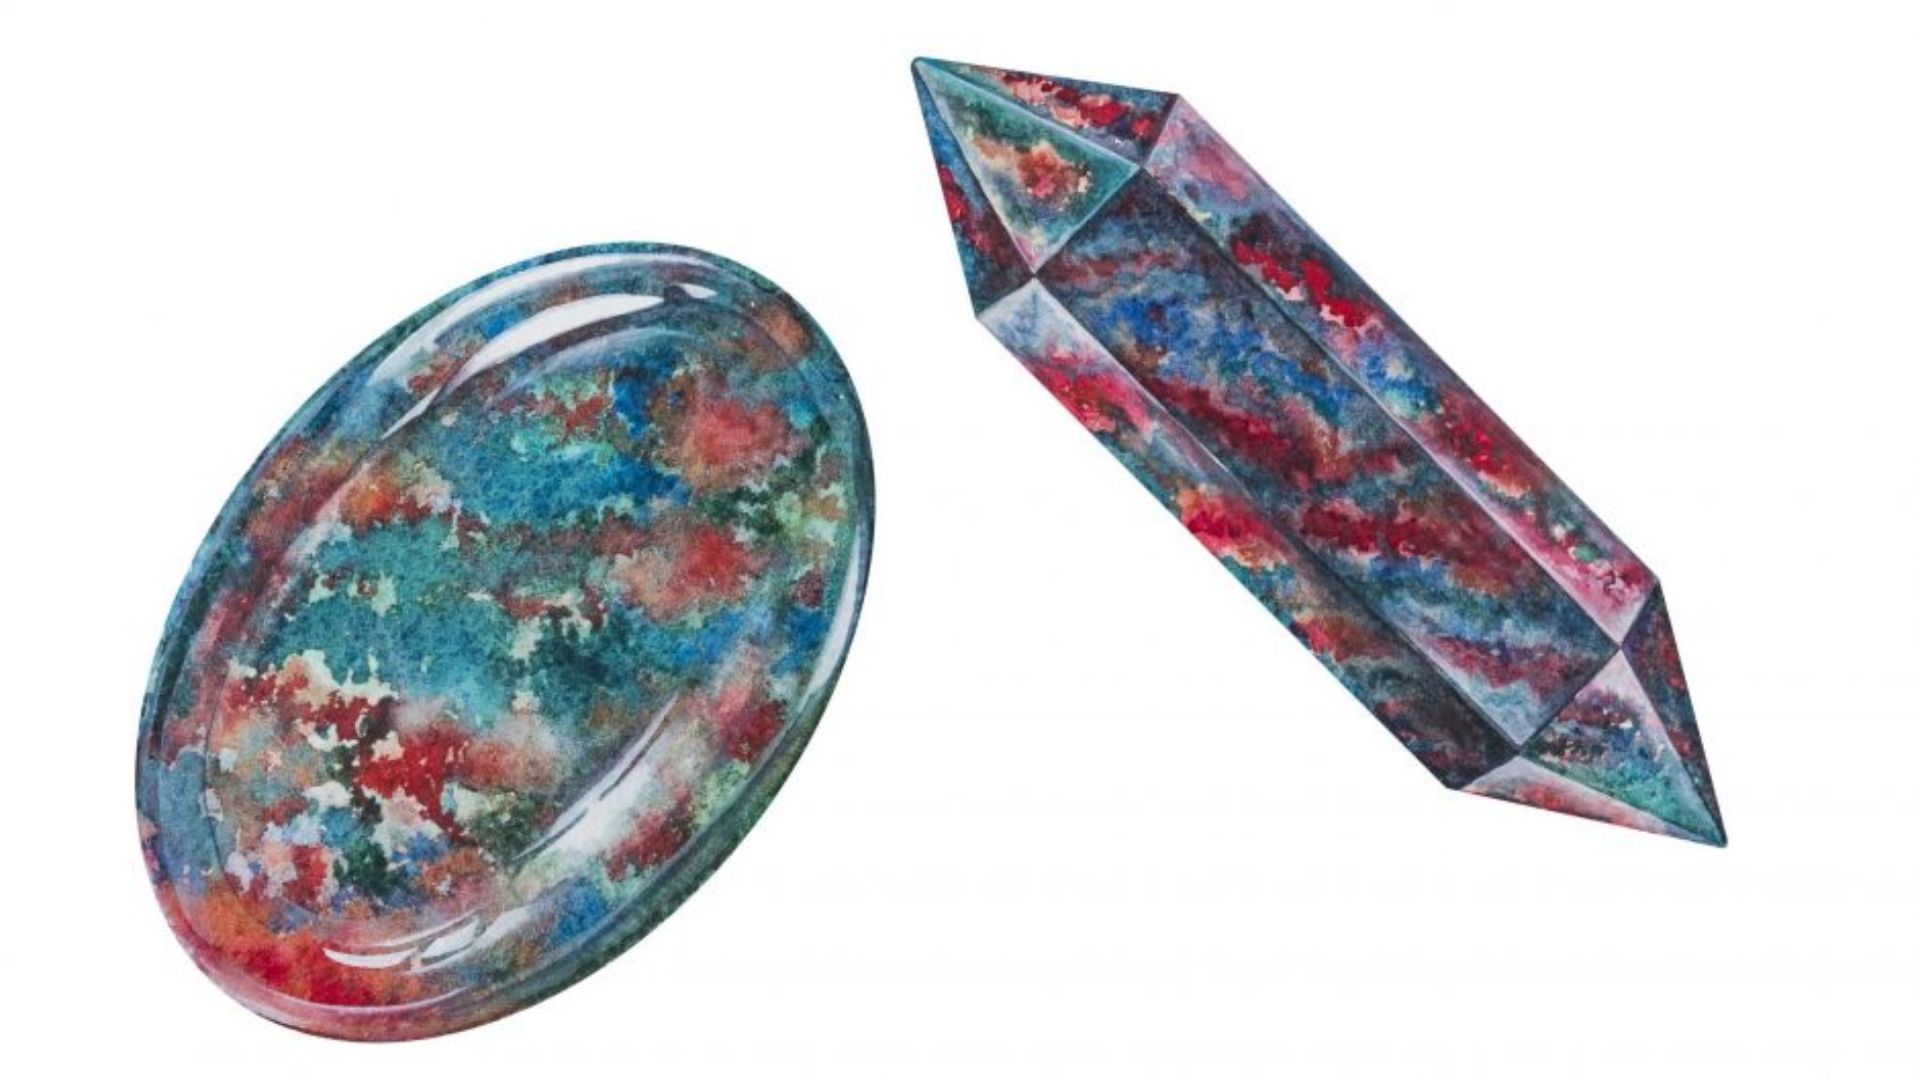 Oval And Pencil-Shaped Bloodstone Gems